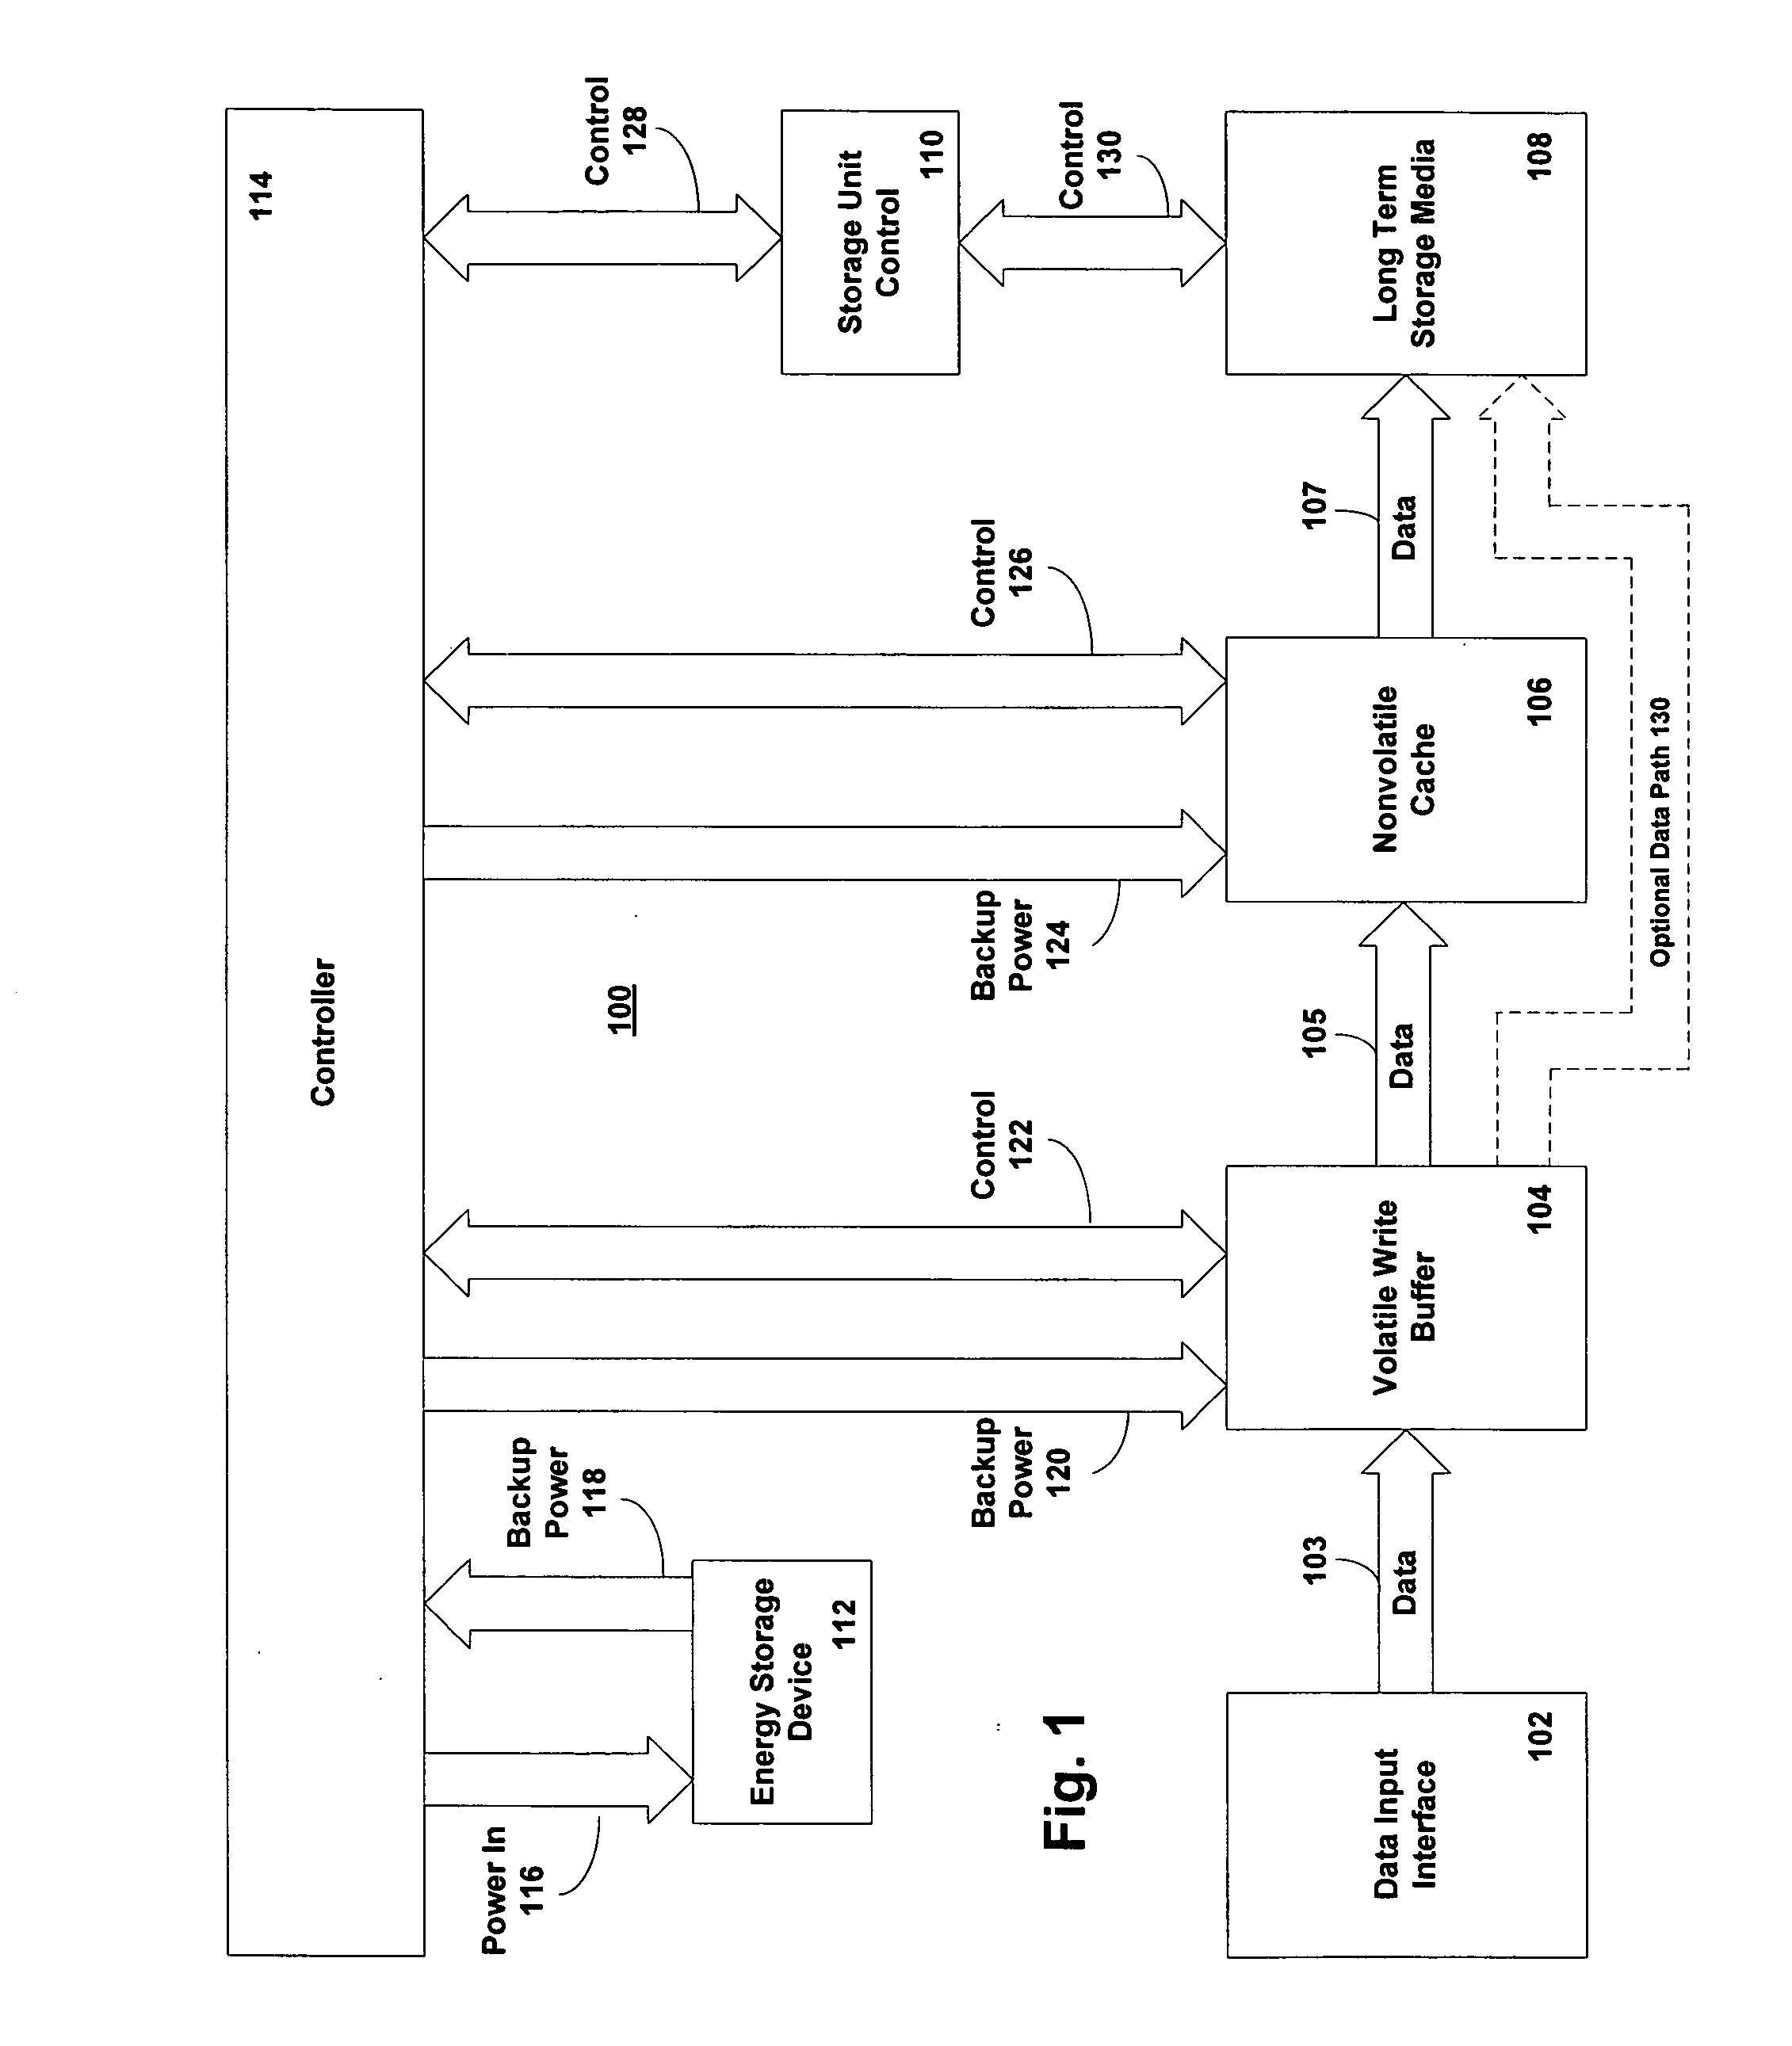 Method and system for improved reliability in storage devices